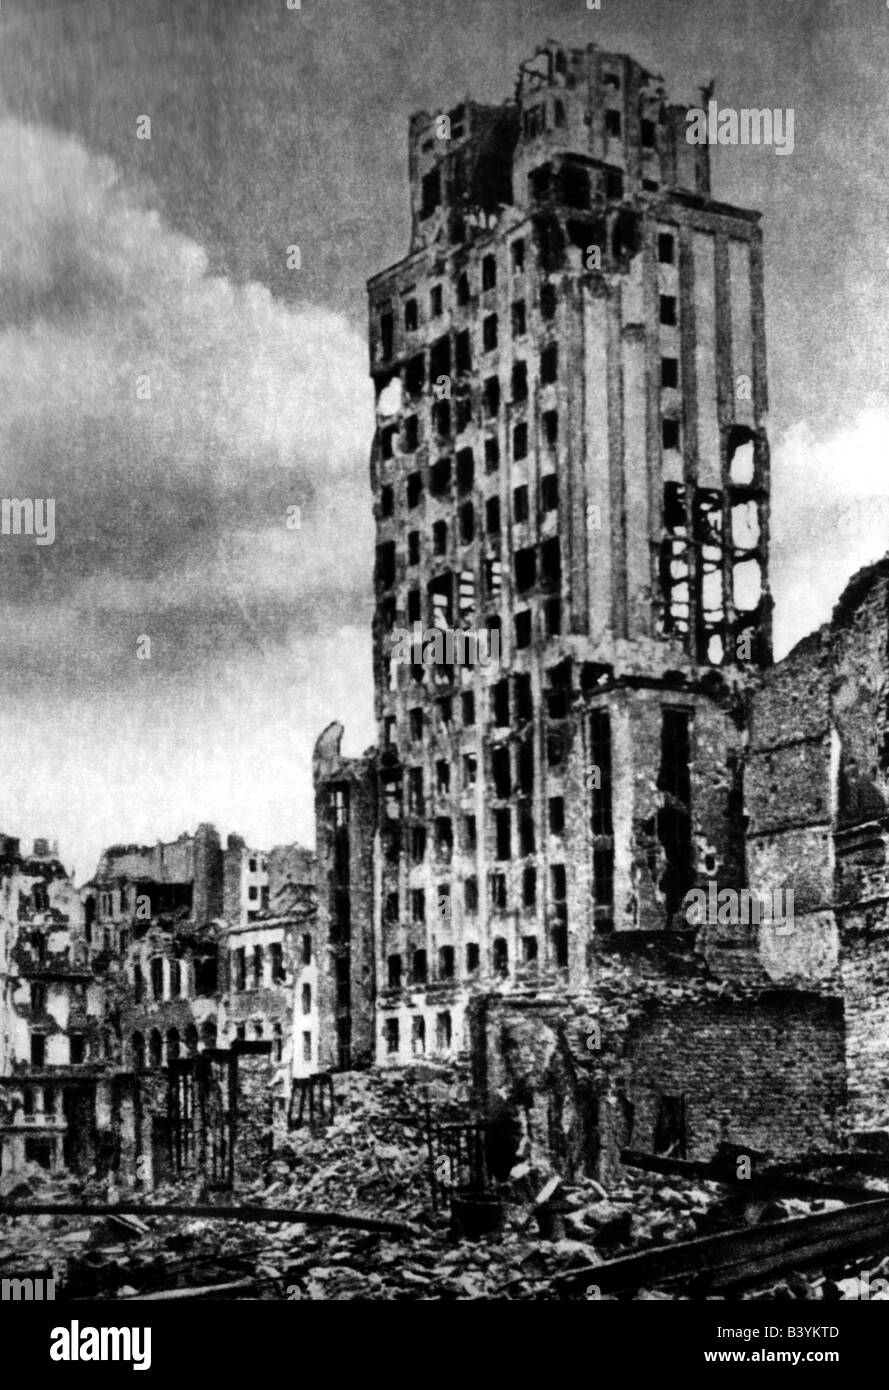 events, Second World War / WWII, Poland, Warsaw Uprising, 1.8. - 2.10.1944, ruins after the defeat of the uprising, Stock Photo